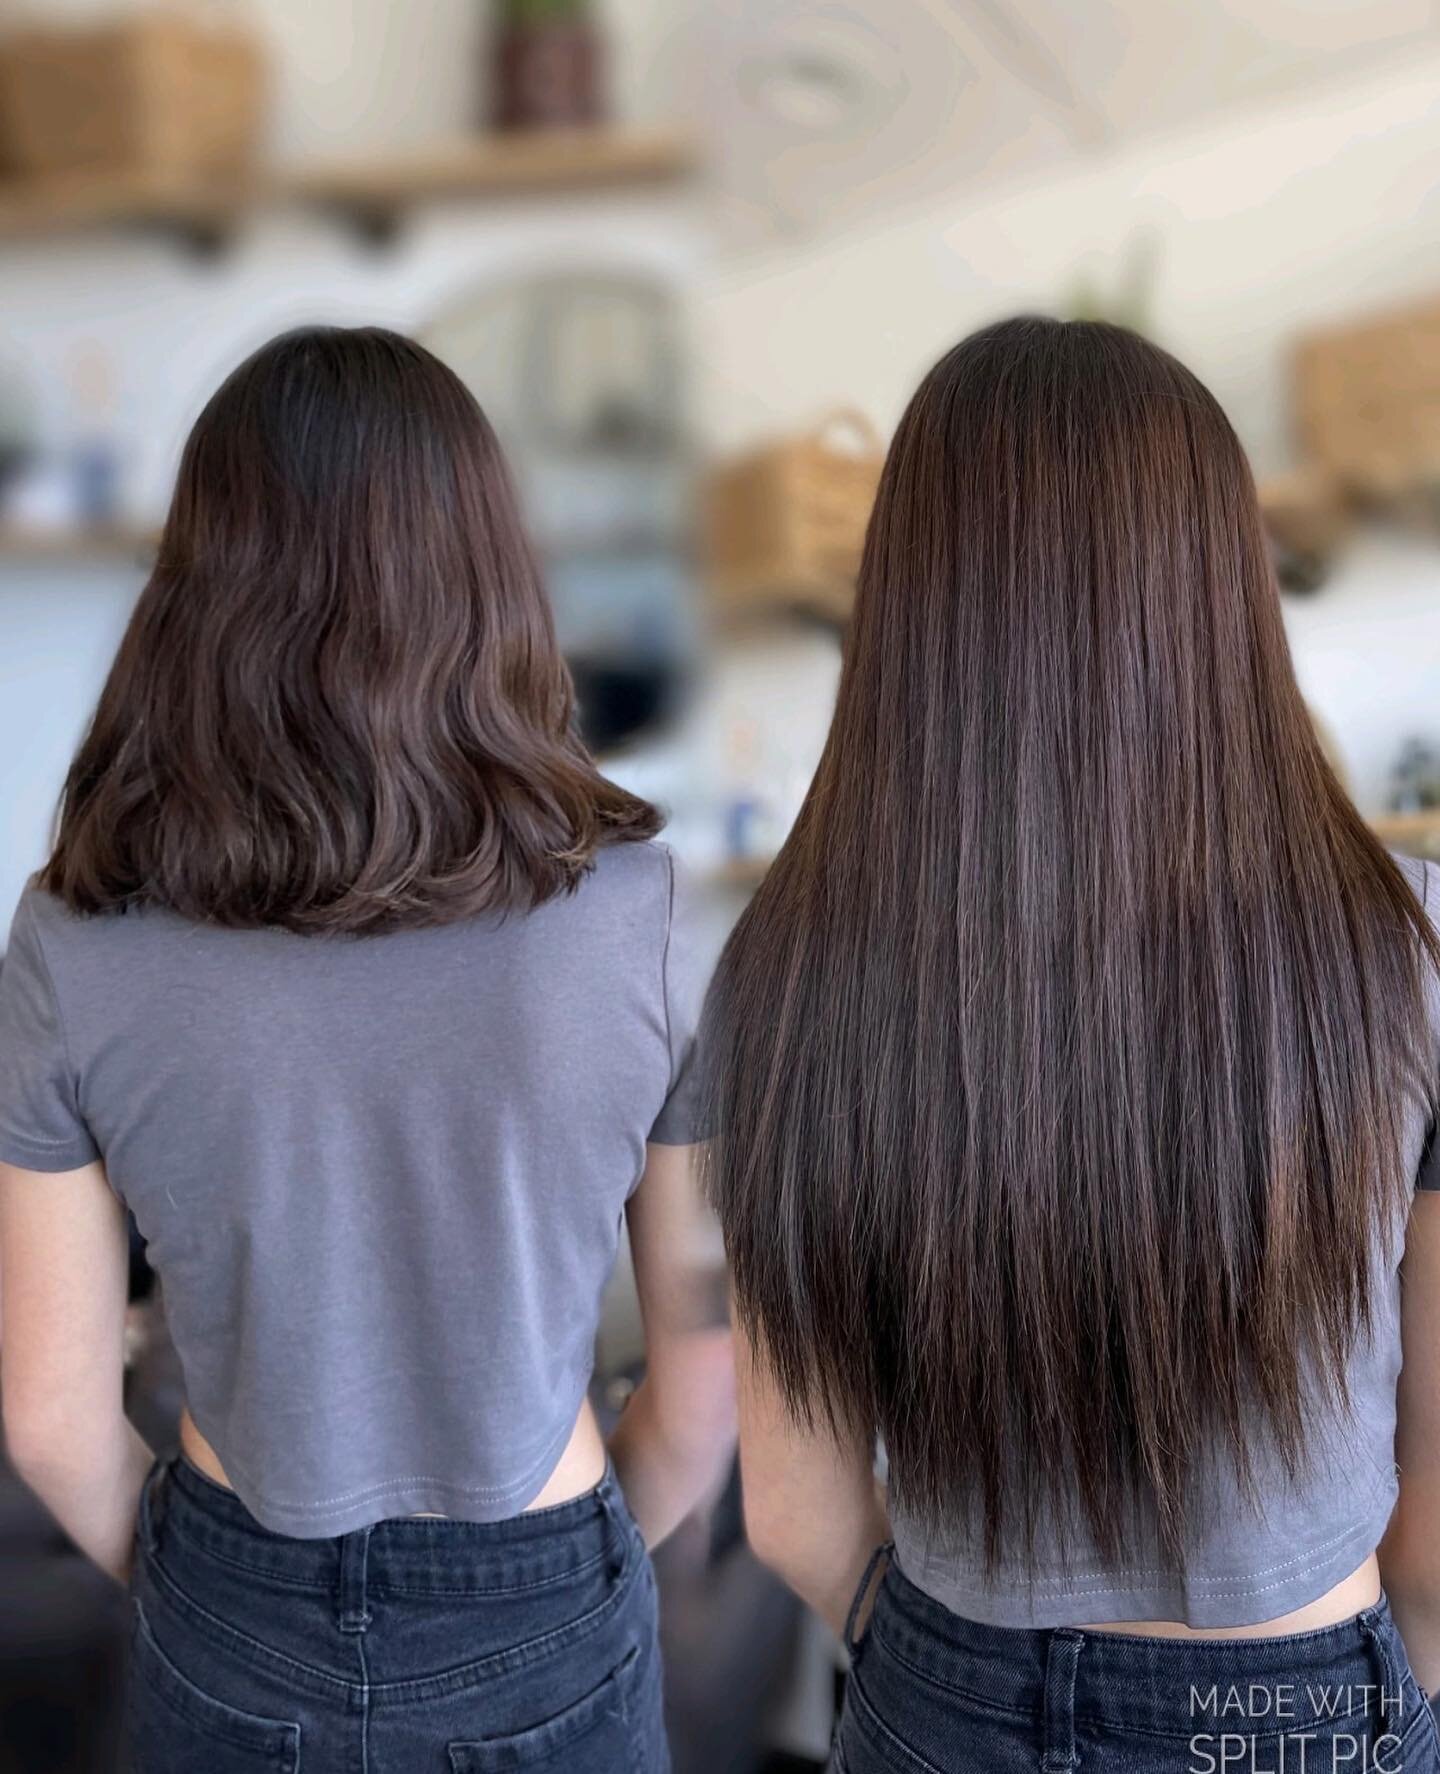 HOW MANY ROWS??

If you&rsquo;re thinking 2 rows, that is a hard no&hellip; unless of course you have extra thin/fine hair&hellip; like see through hair.

For a blunt bob more than likely you will need 3-4 rows to get it to blend depending on how thi